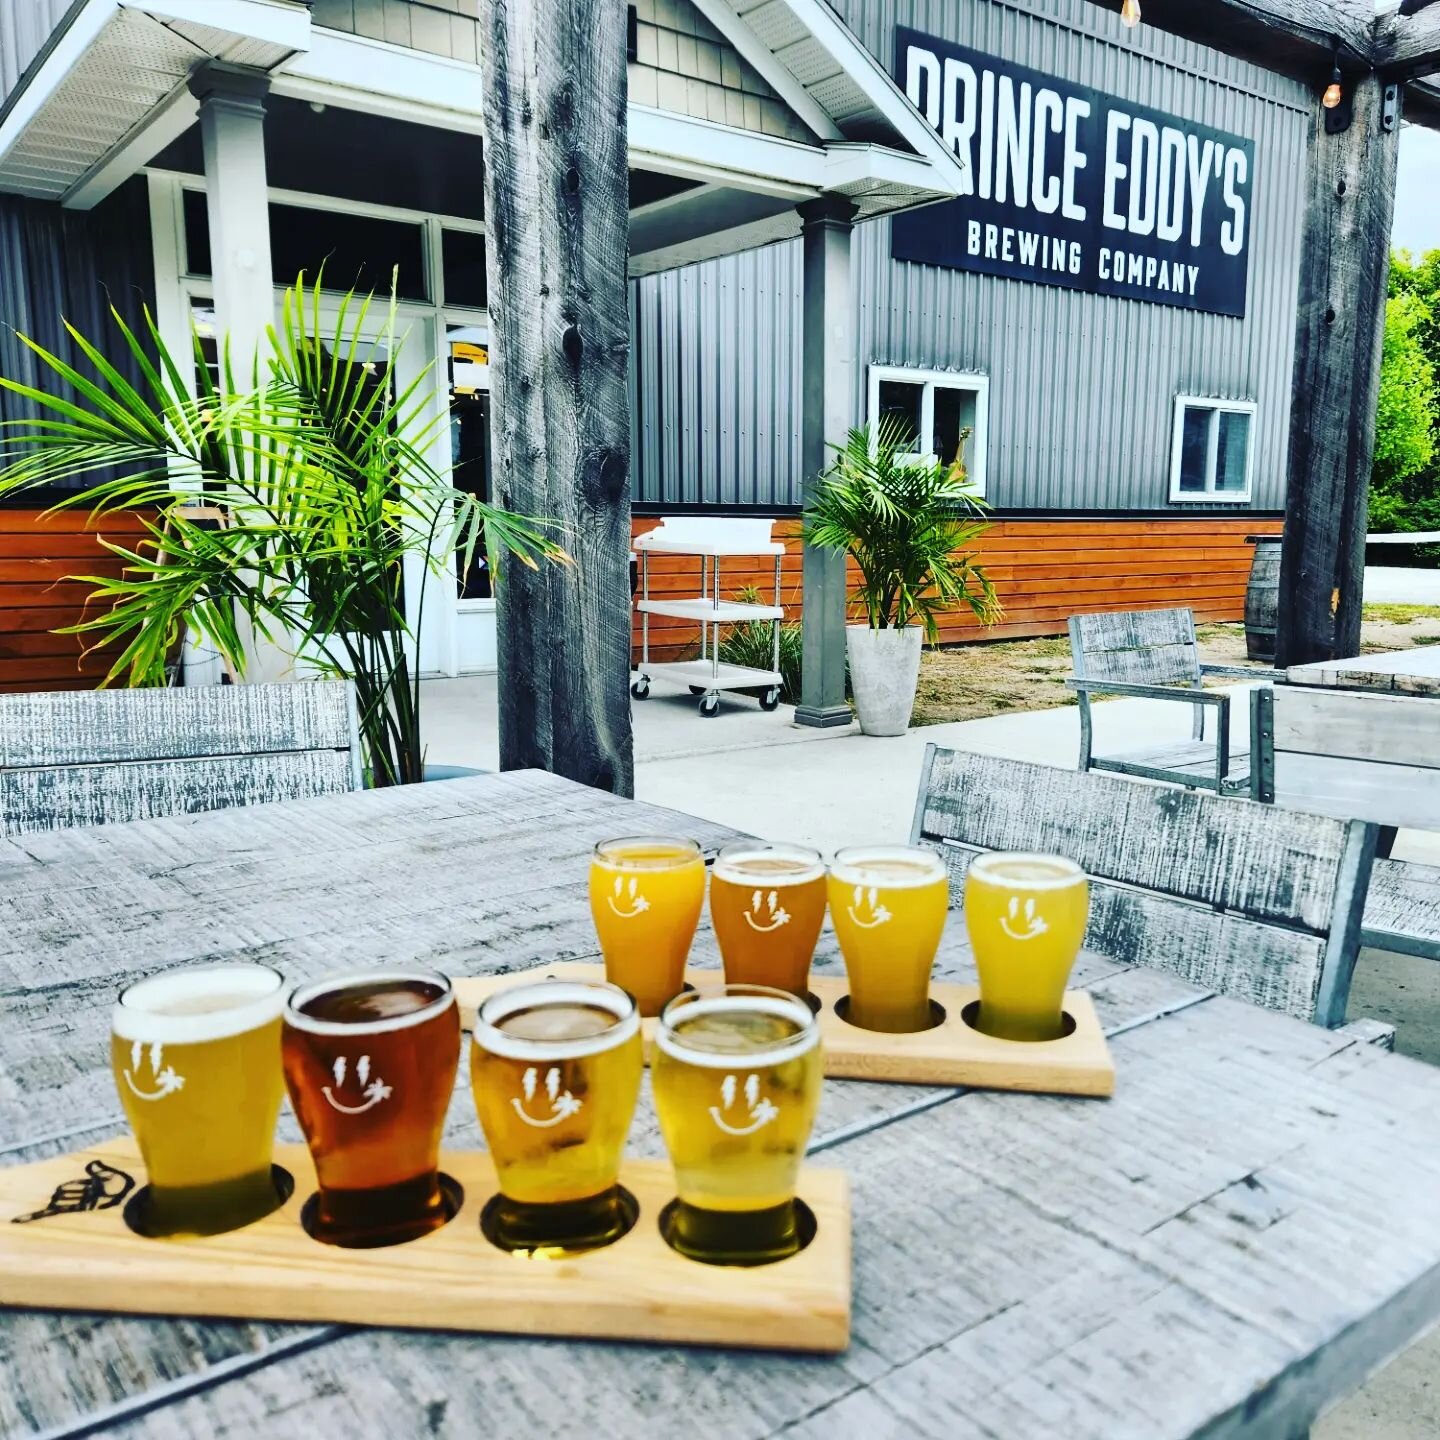 When exploring #princeedwardcounty we love to visit @princeeddysbrewing.  This is always a recoended destination for our guests @theredbricksuites

Great space, friendly staff, and cold tasty beer. 

We couldn't decide on which 🍺🍺🍺🍺 to choose for